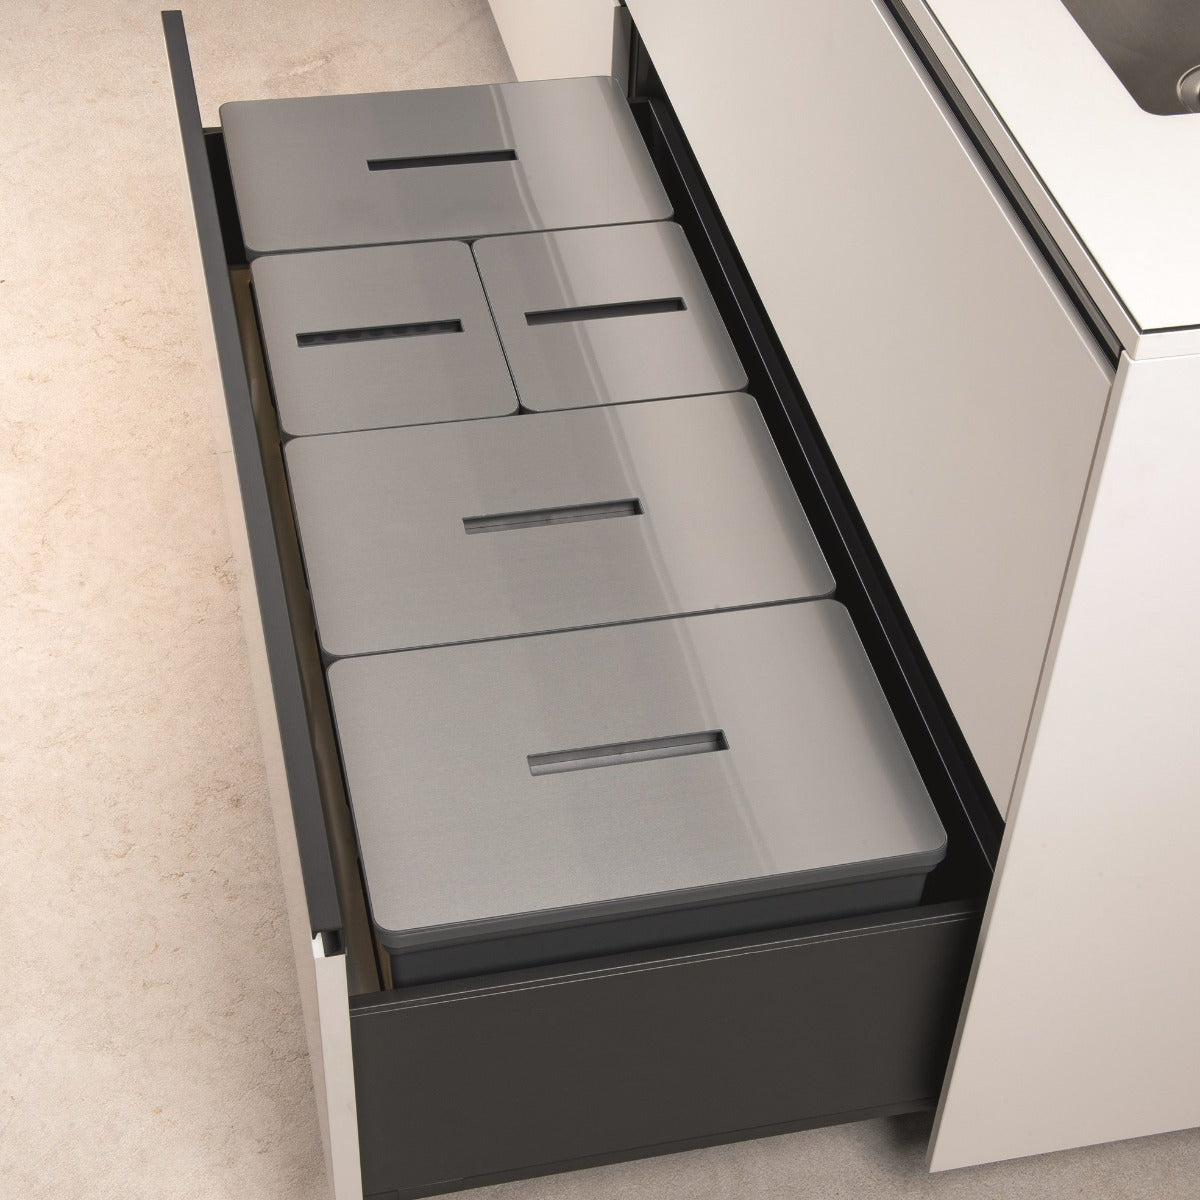 Tecnoinox Tecnobig  5 compartment 99 Litre in-drawer kitchen recycling bin in dark grey for 1200mm wide pan-drawers TECNOBIG.120.GR